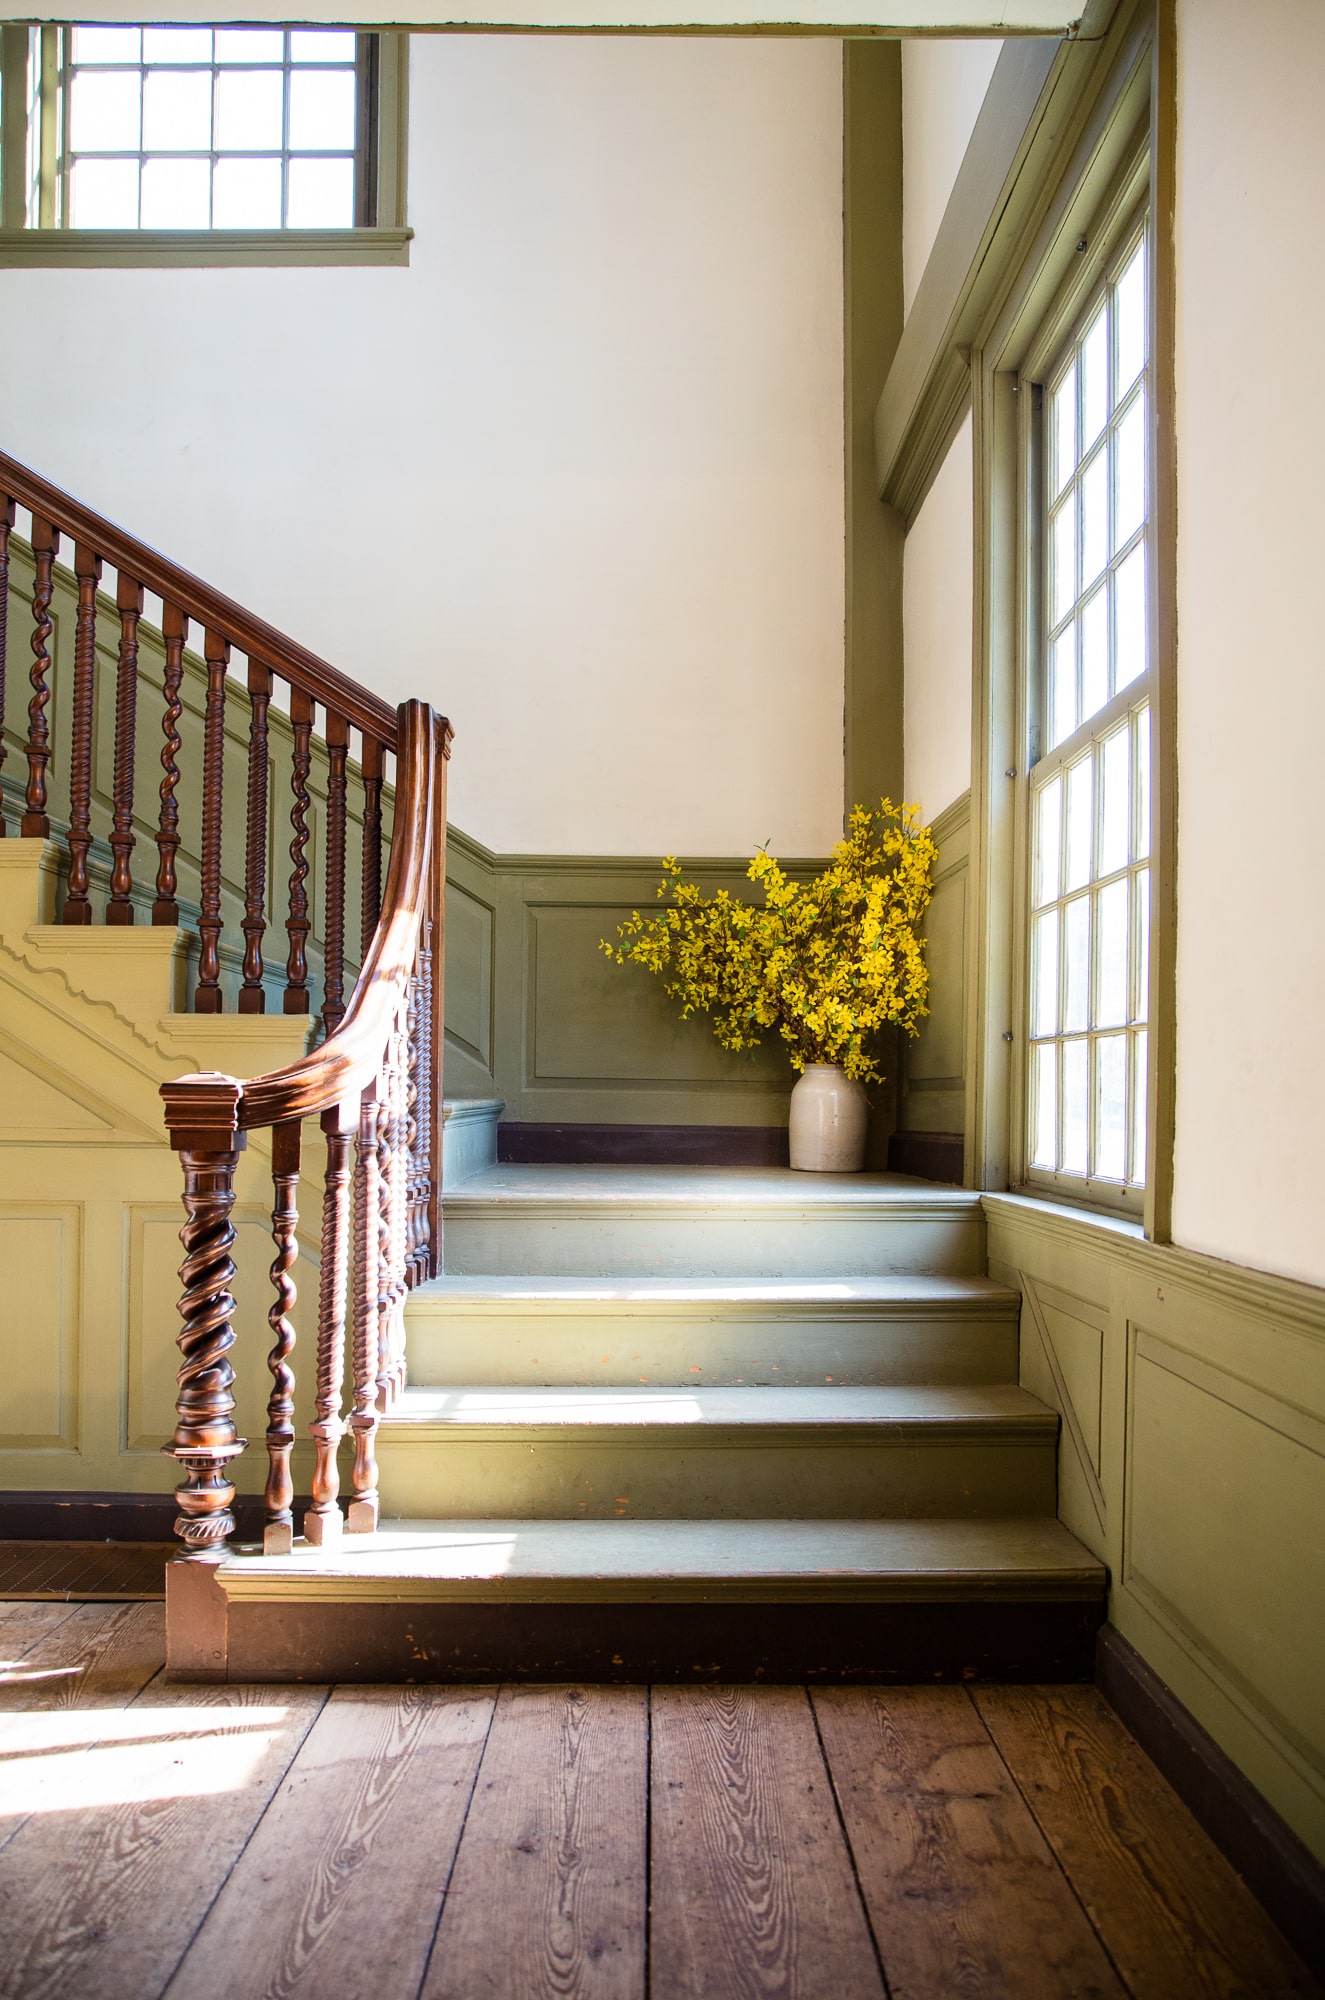 An ornate Georgian staircase inside the Joseph Webb House, circa 1752. The property was designated a national historic landmark in 1961.